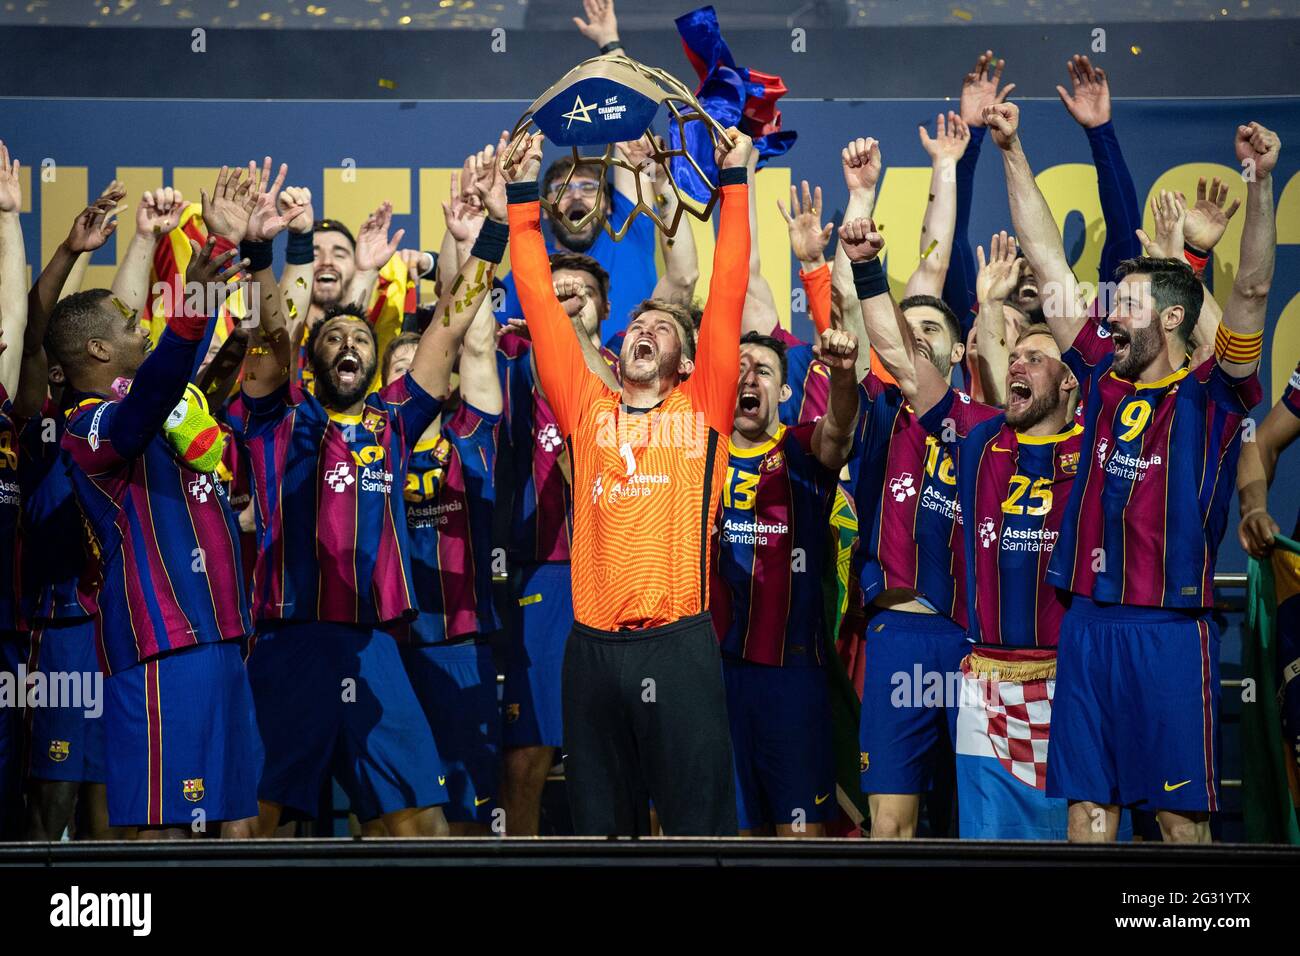 Cologne, Germany. 13th June, 2021. Handball: Champions League, FC Barcelona  - Aalborg HB, Final Round, Final Four, Final at the Lanxess Arena.  Barcelona goalkeeper Gonzalo Perez de Vargas holds up the trophy